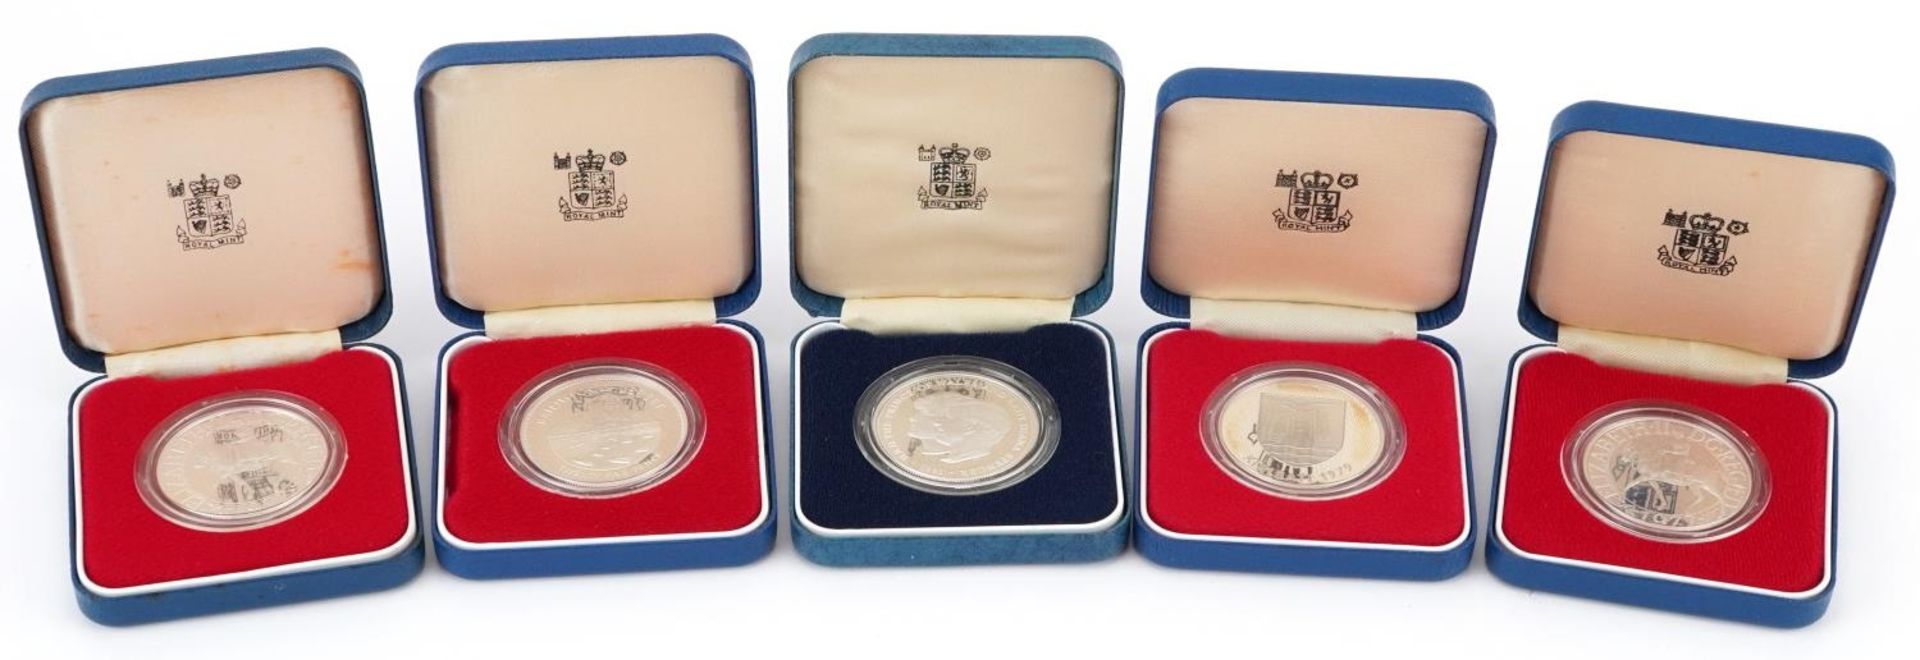 Five 1977 silver proof commemorative crowns by The Royal Mint with fitted cases